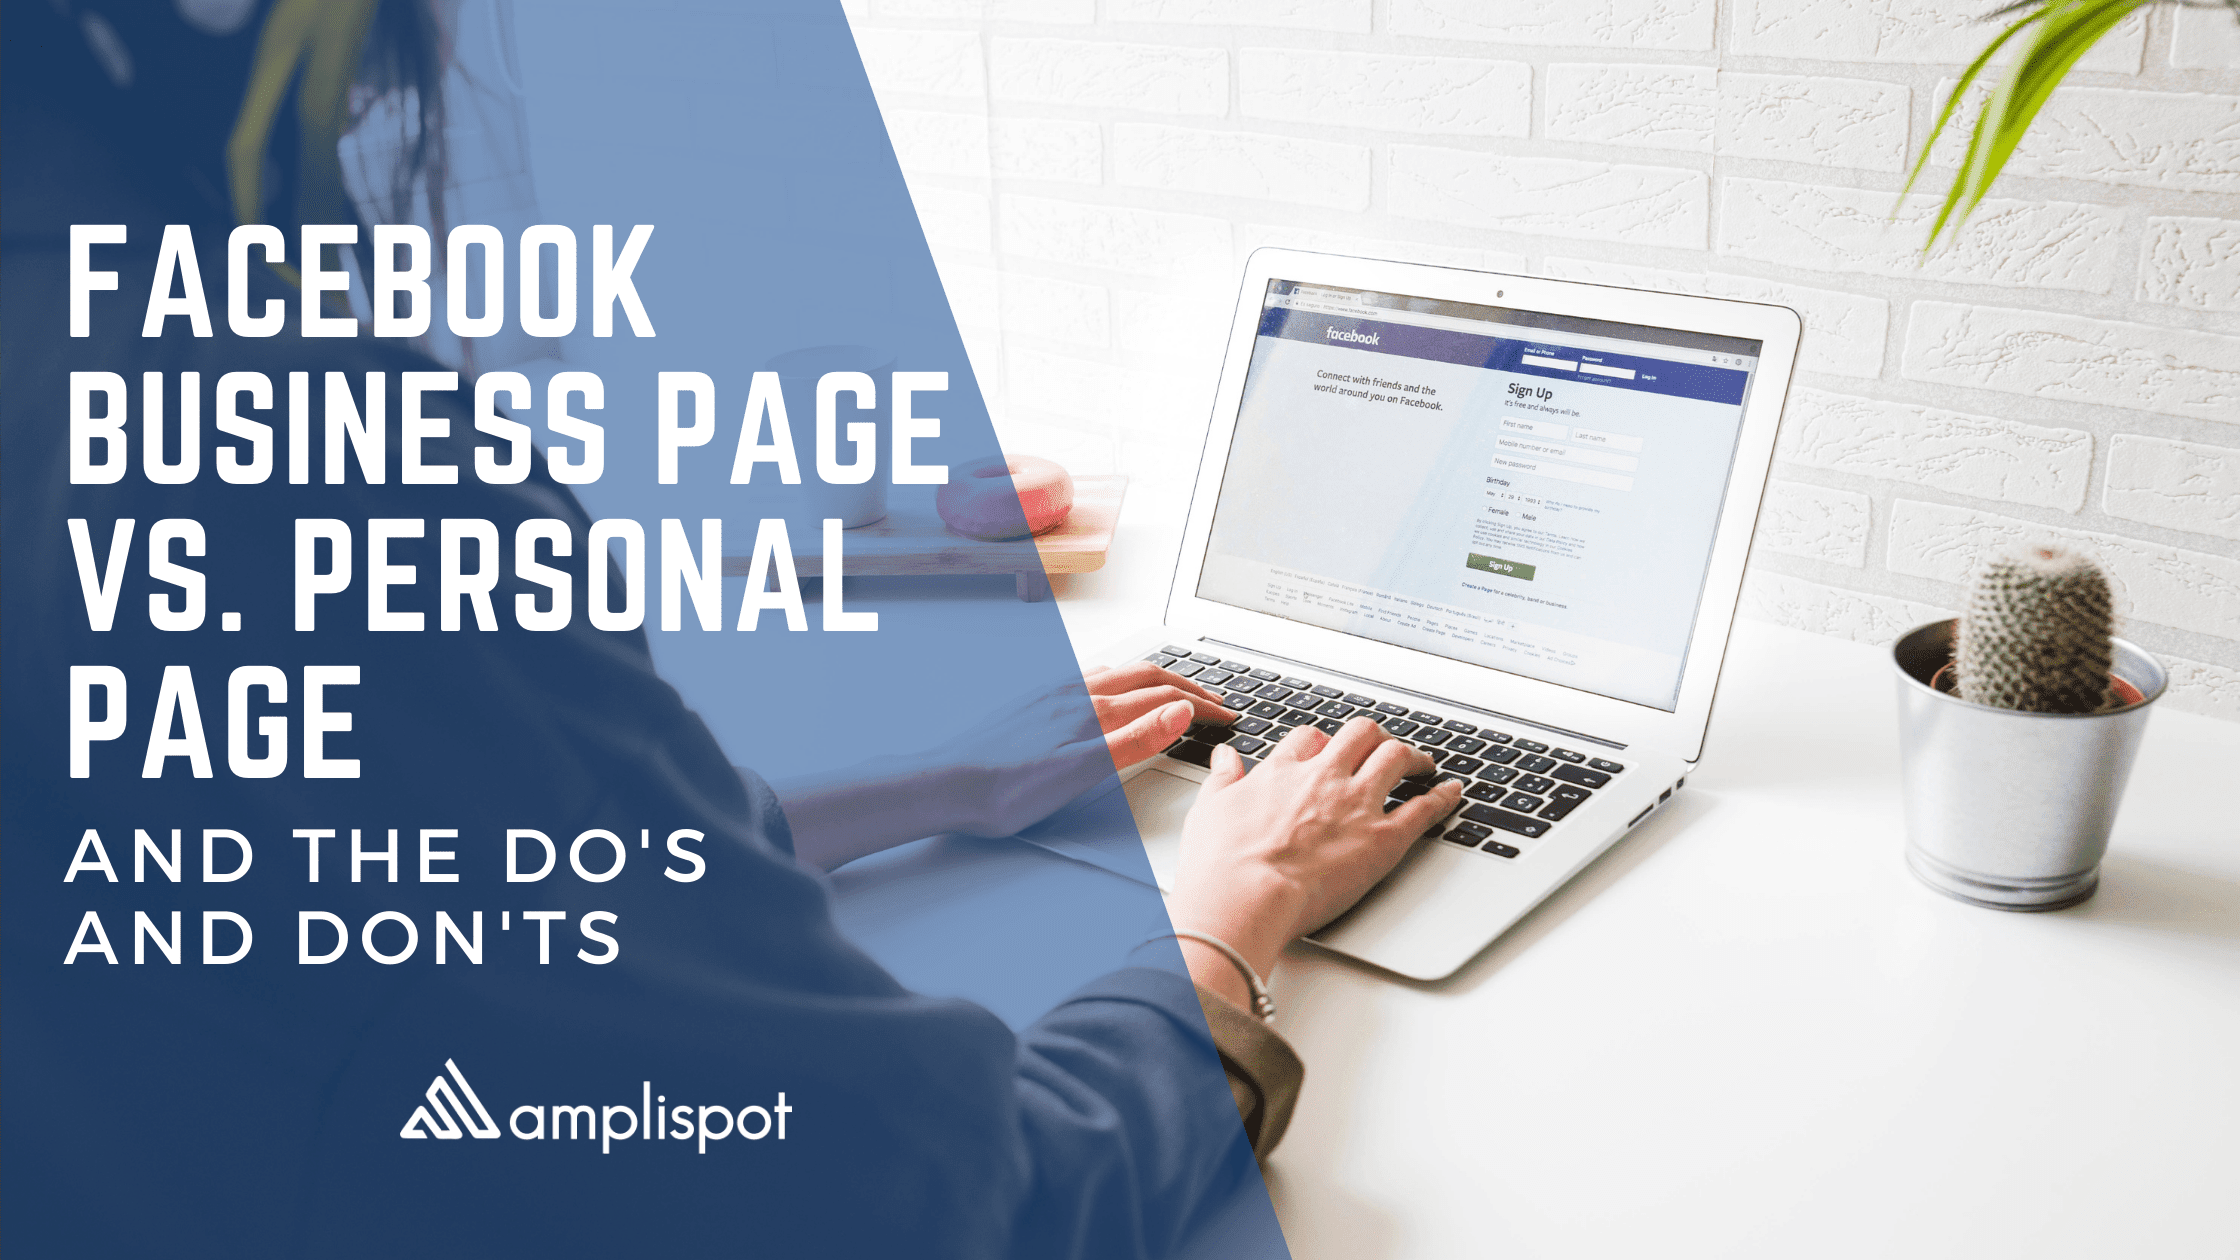 Facebook Business Page vs. Personal Page and the Do's and Don'ts